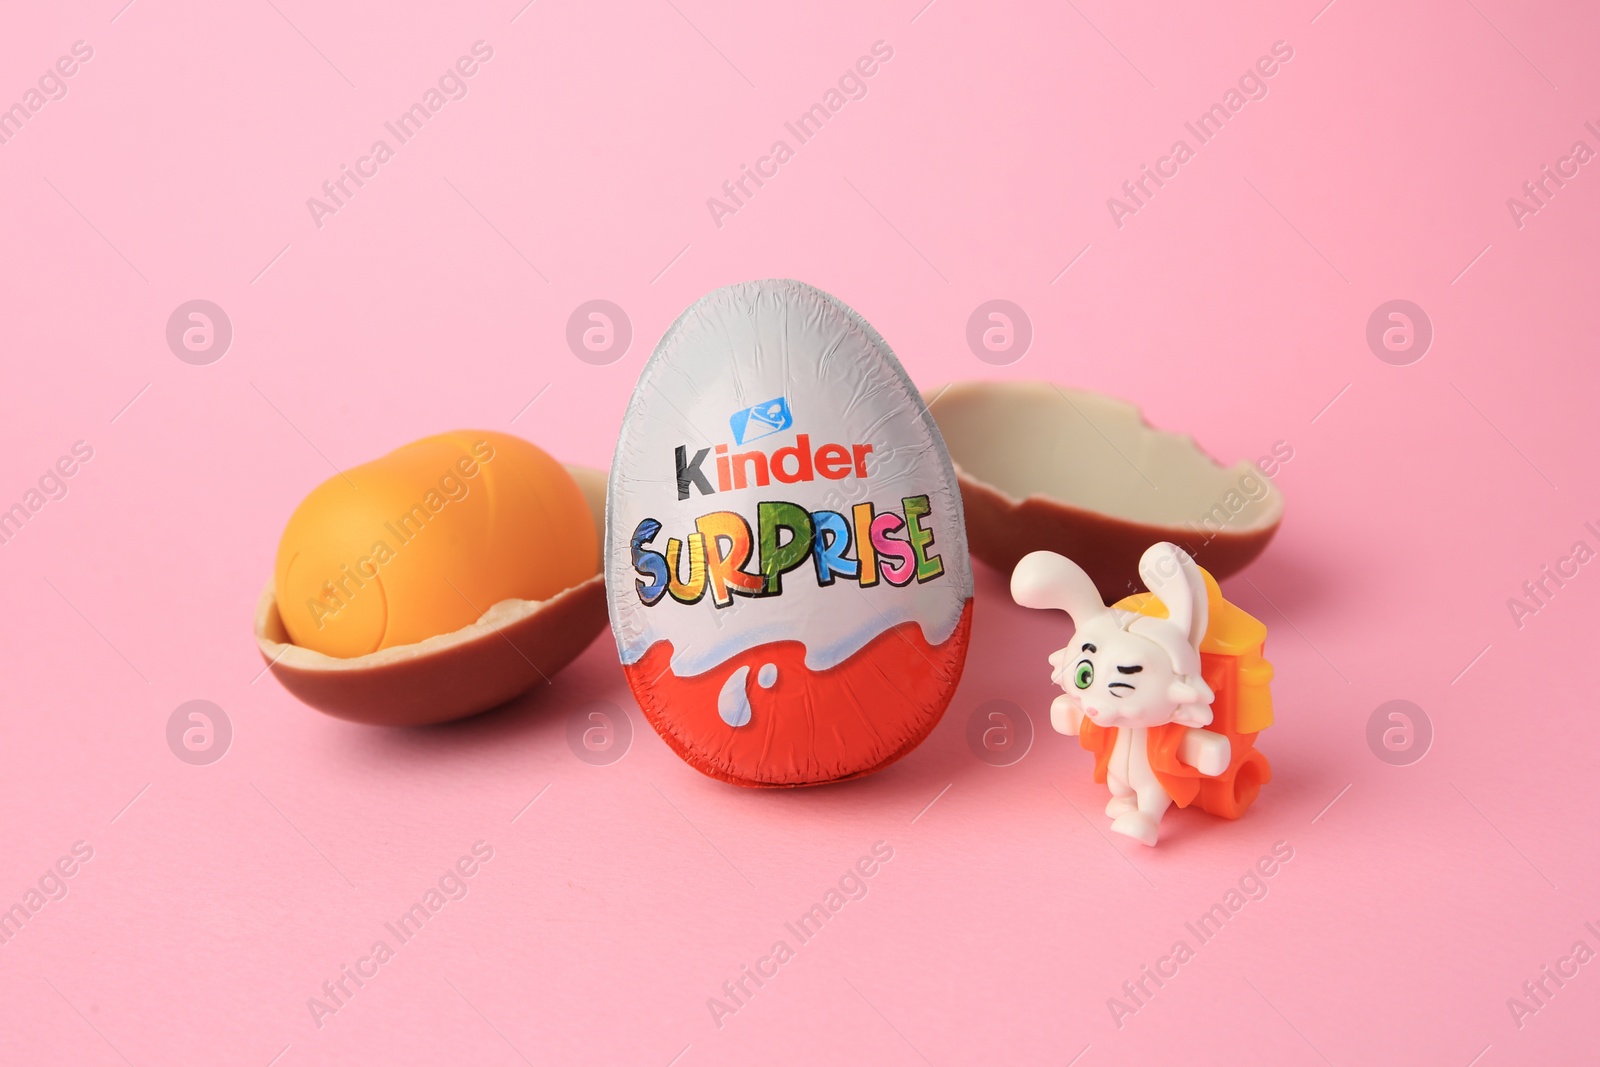 Photo of Slynchev Bryag, Bulgaria - May 25, 2023: Kinder Surprise Eggs, plastic capsule and toy bunny on pink background